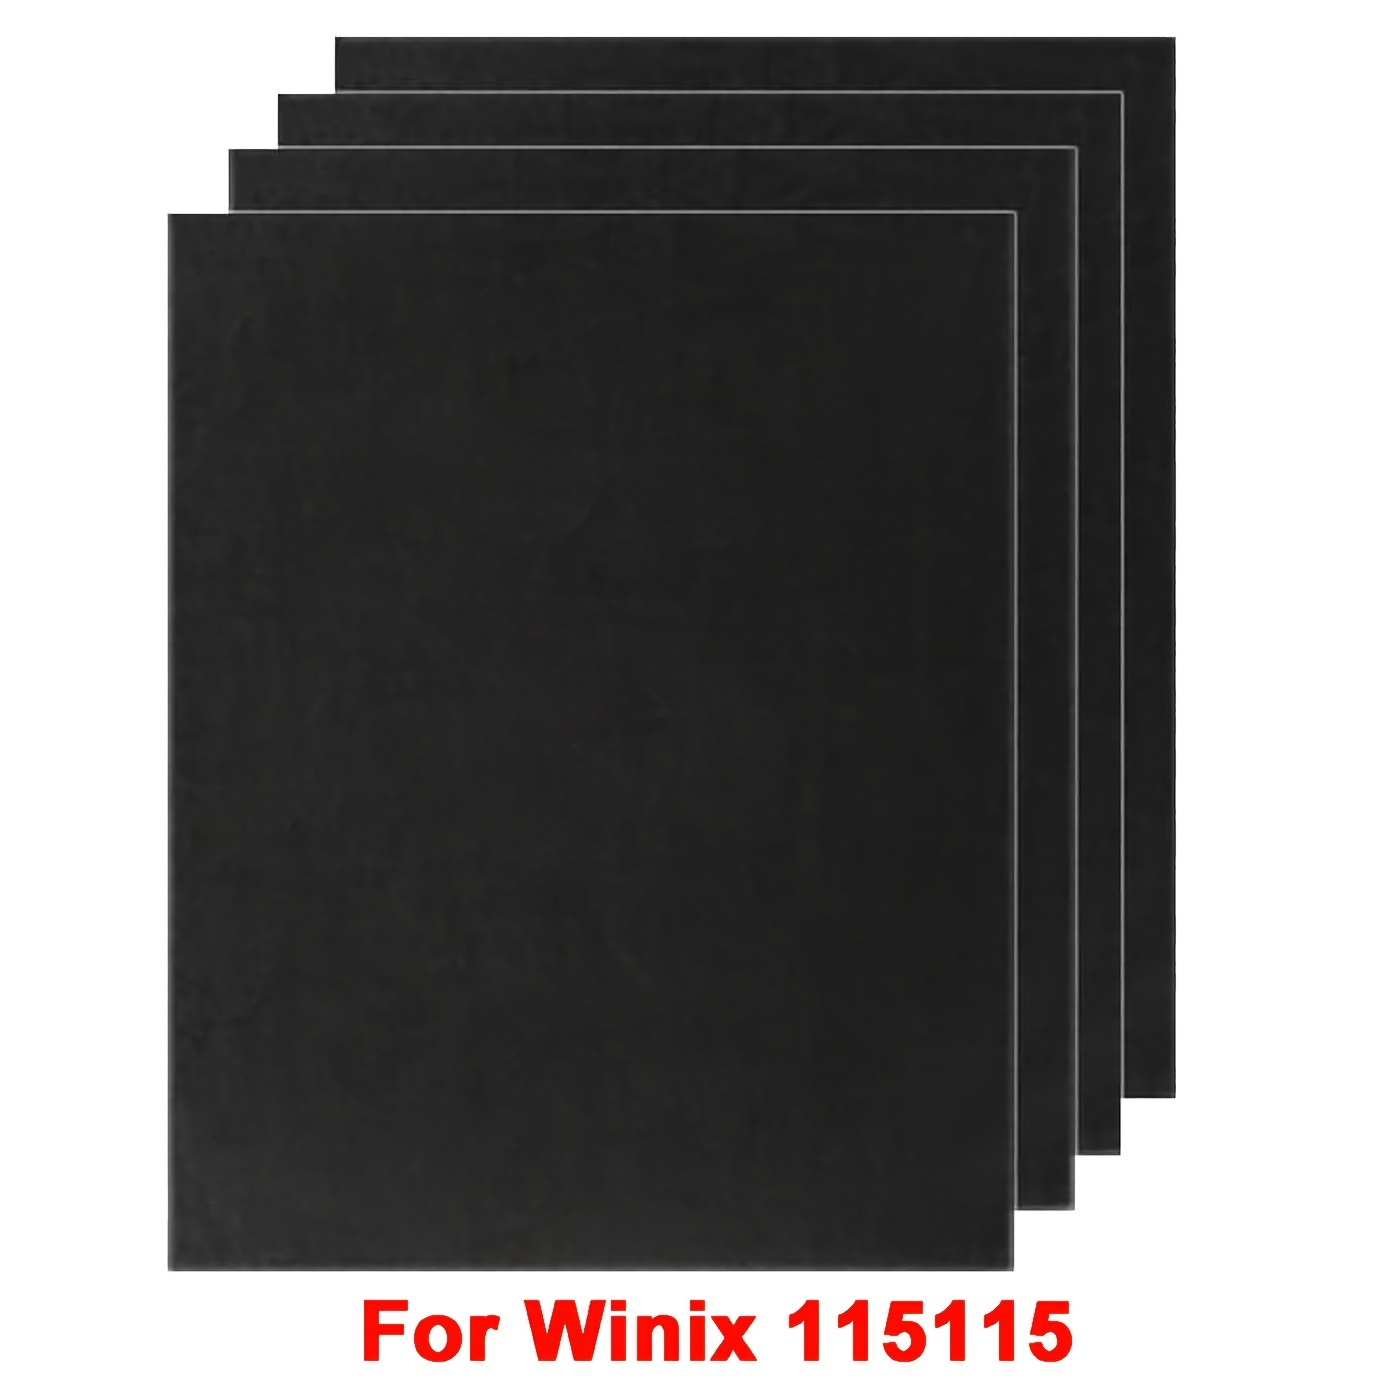 

Activated Carbon Pre-filters Replacement Compatible With Winix Odor Control Part Filter A 115115 Size 21 | Am90, C535, 5300-2 | 4 Sheet